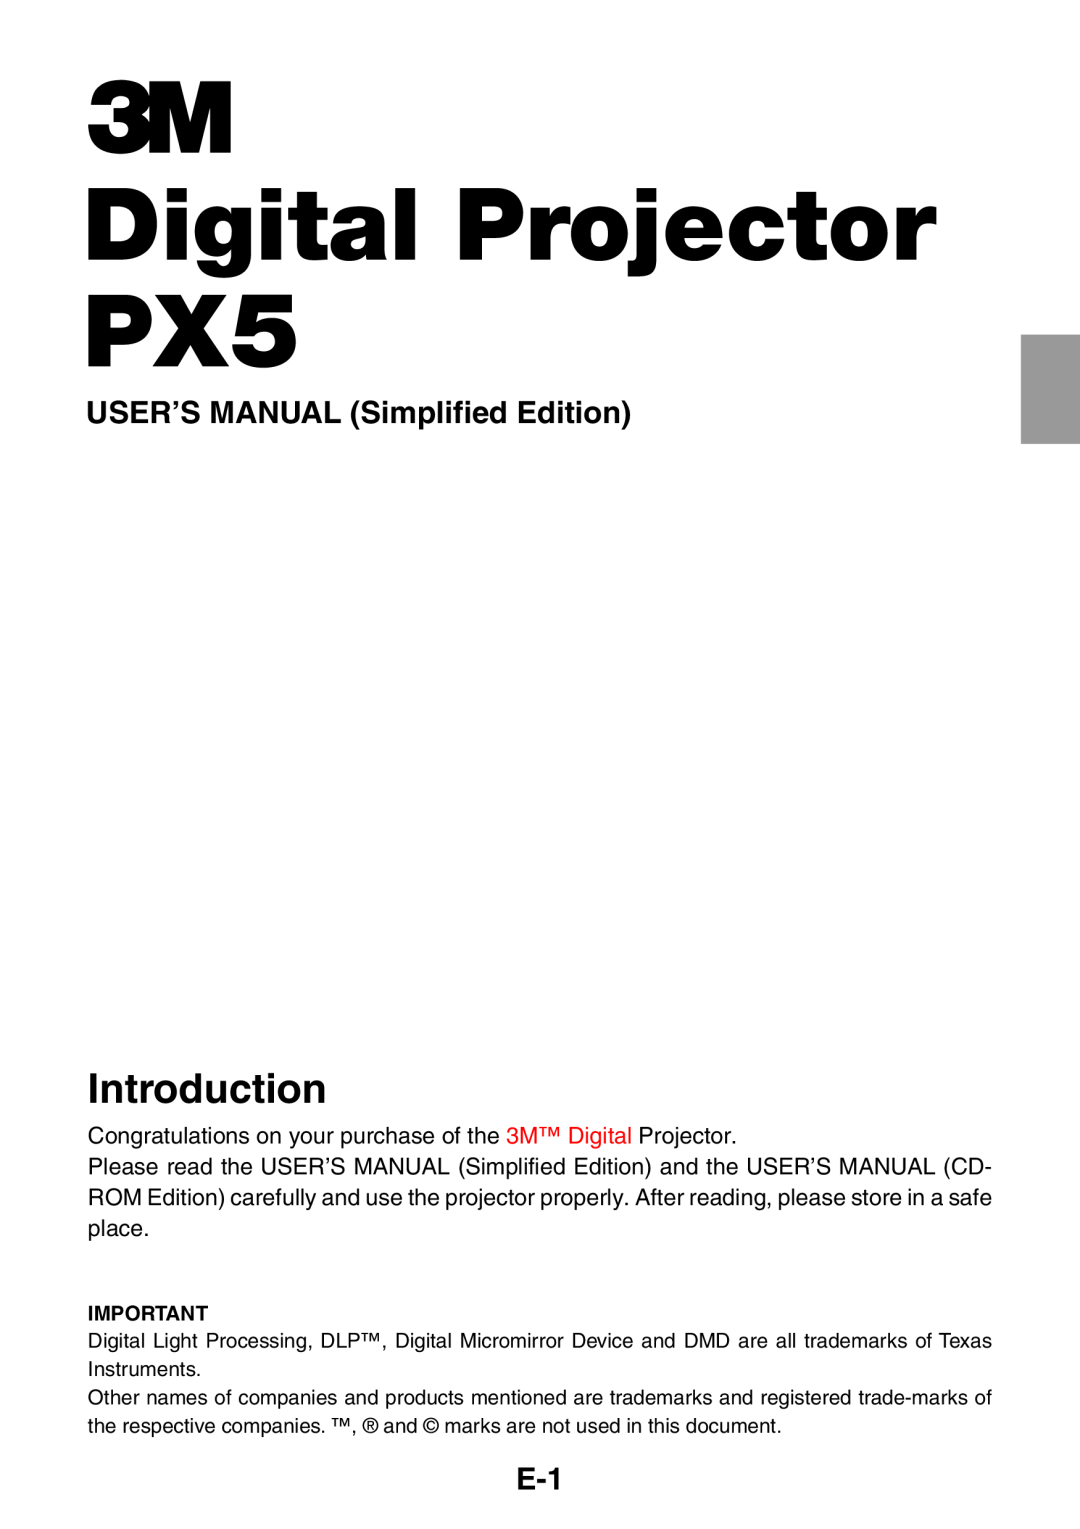 3M user manual Digital Projector PX5, Introduction, USER’S MANUAL Simplified Edition 